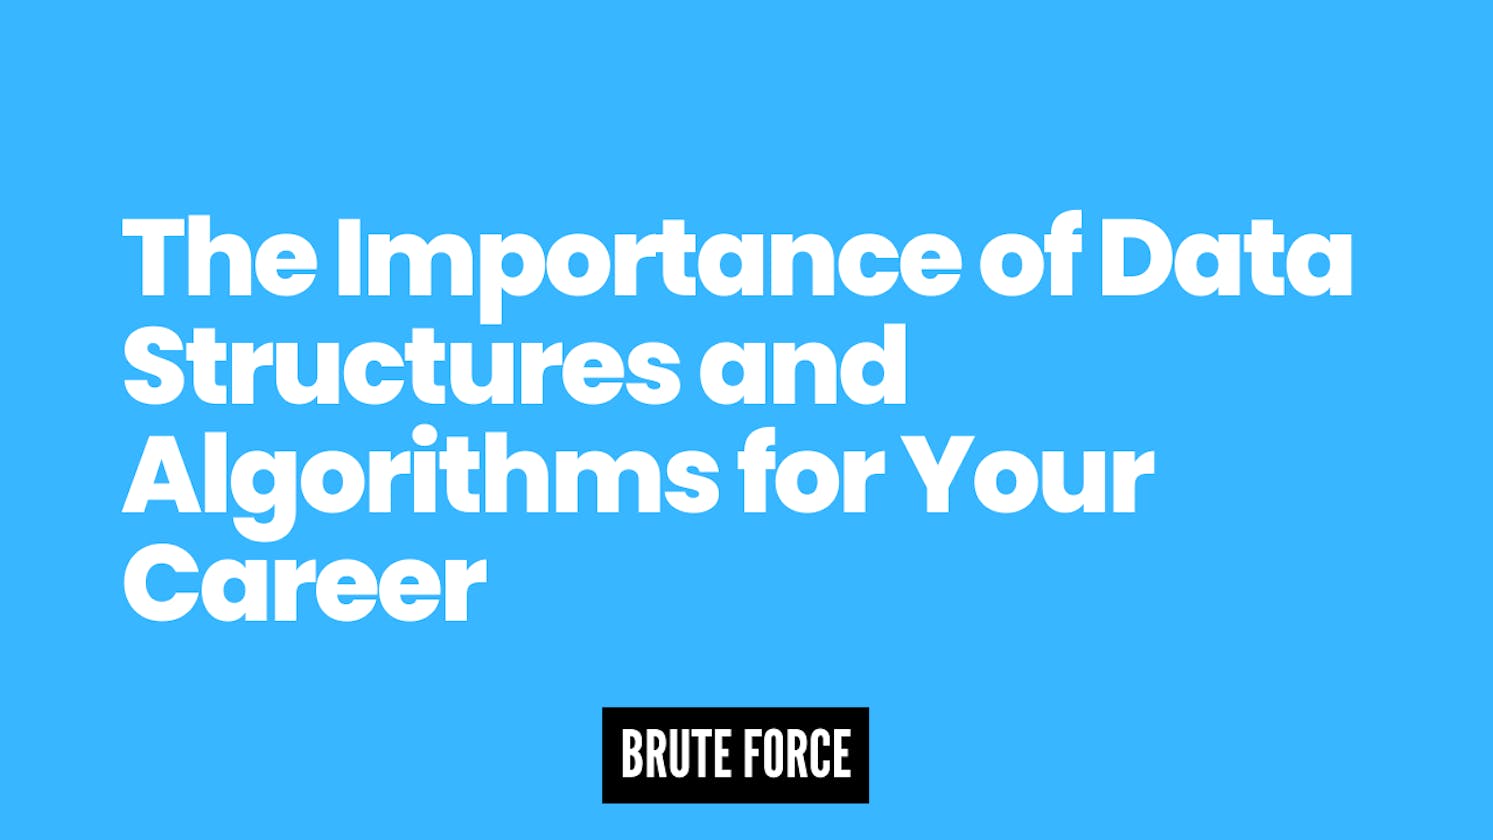 The Importance of Data Structures and Algorithms for Your Career